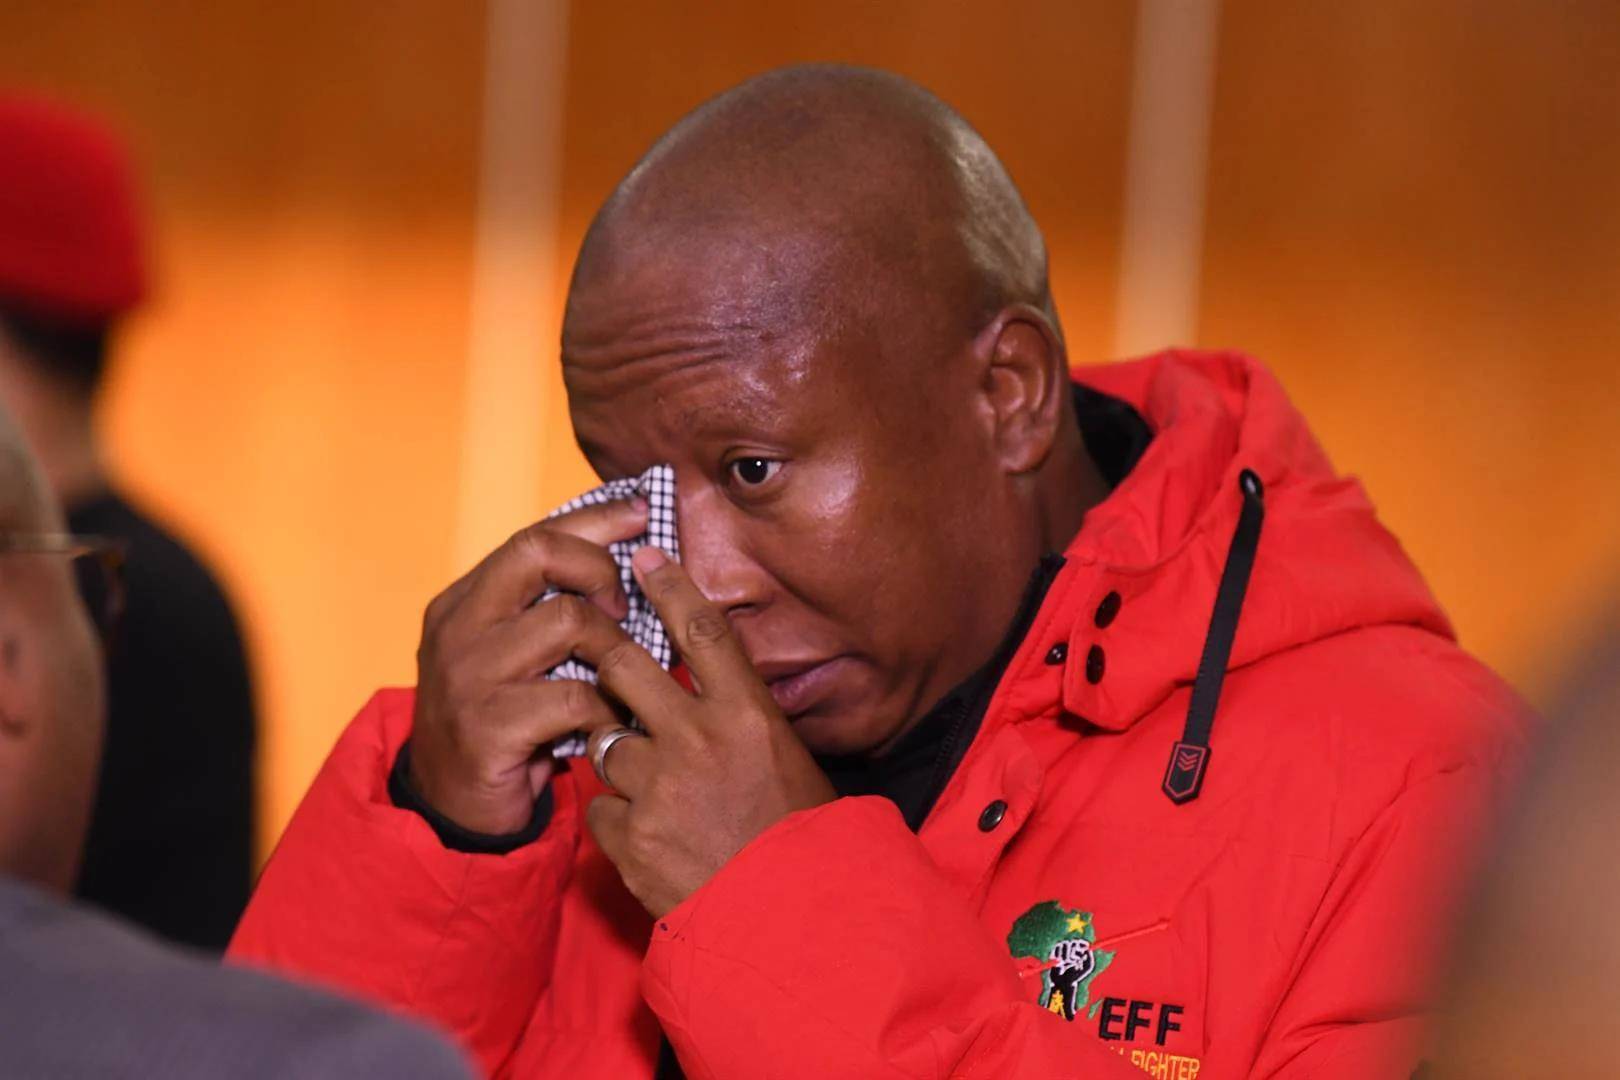 EFF leader Julius Malema will learn his fate on Thursday when the East London Magistrates' Court is expected to rule on his gun charges case.